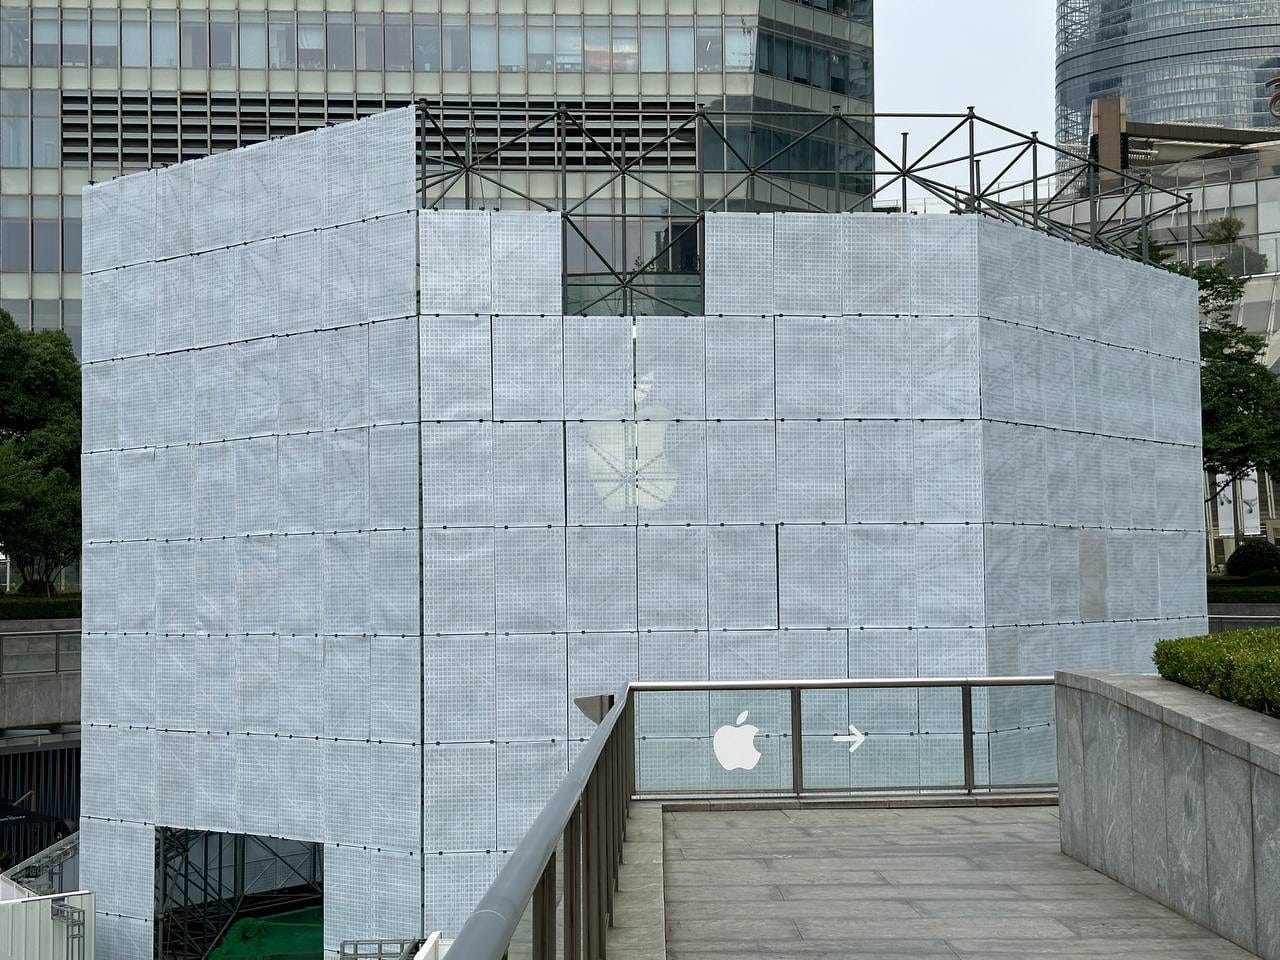 The glass entrance to Apple Pudong partially concealed by temporary scaffolding.